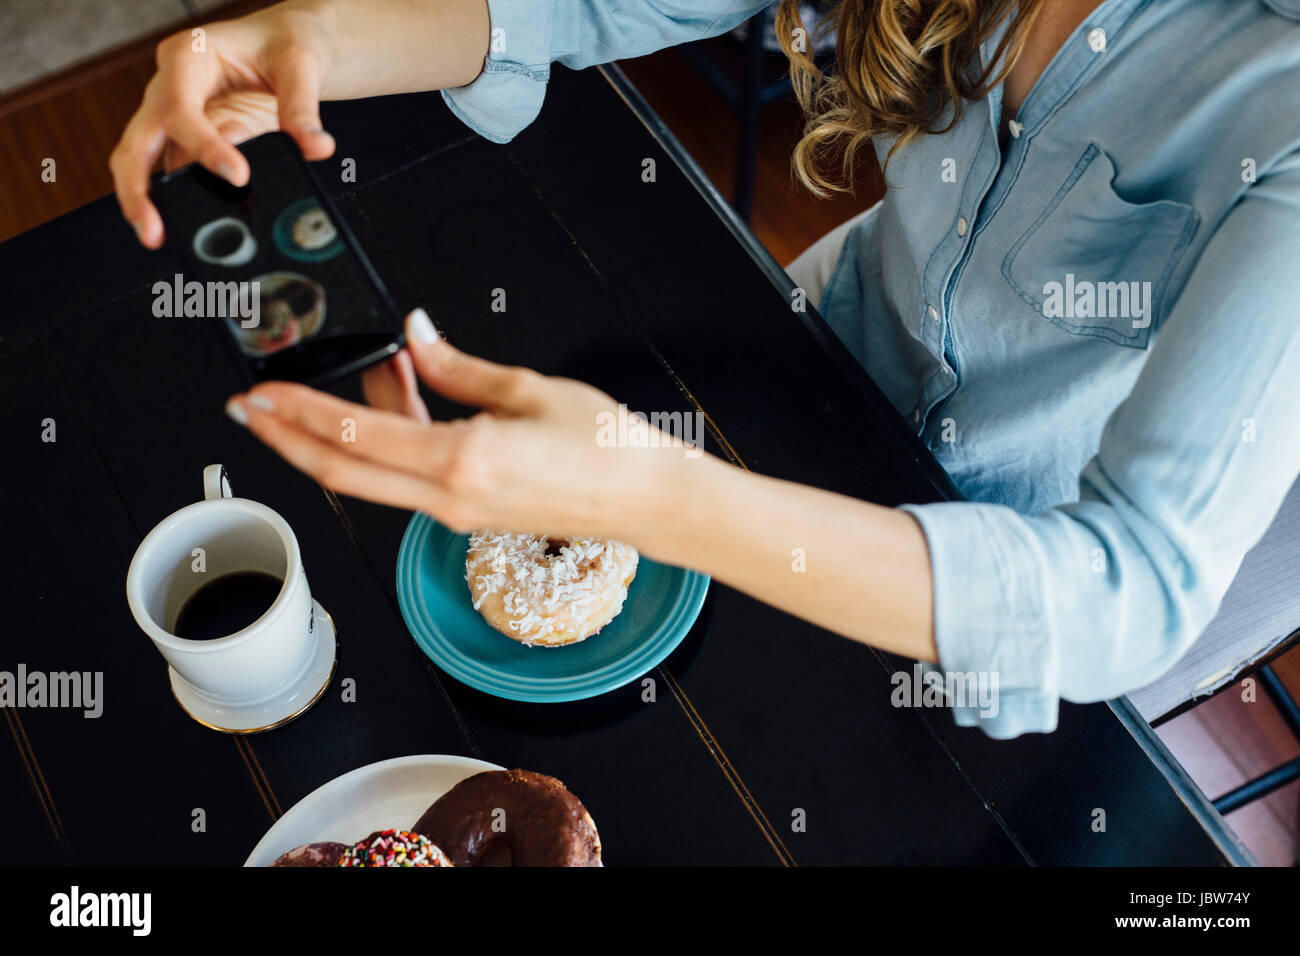 Overhead view of woman photographing doughnut hole and coffee on table Stock Photo